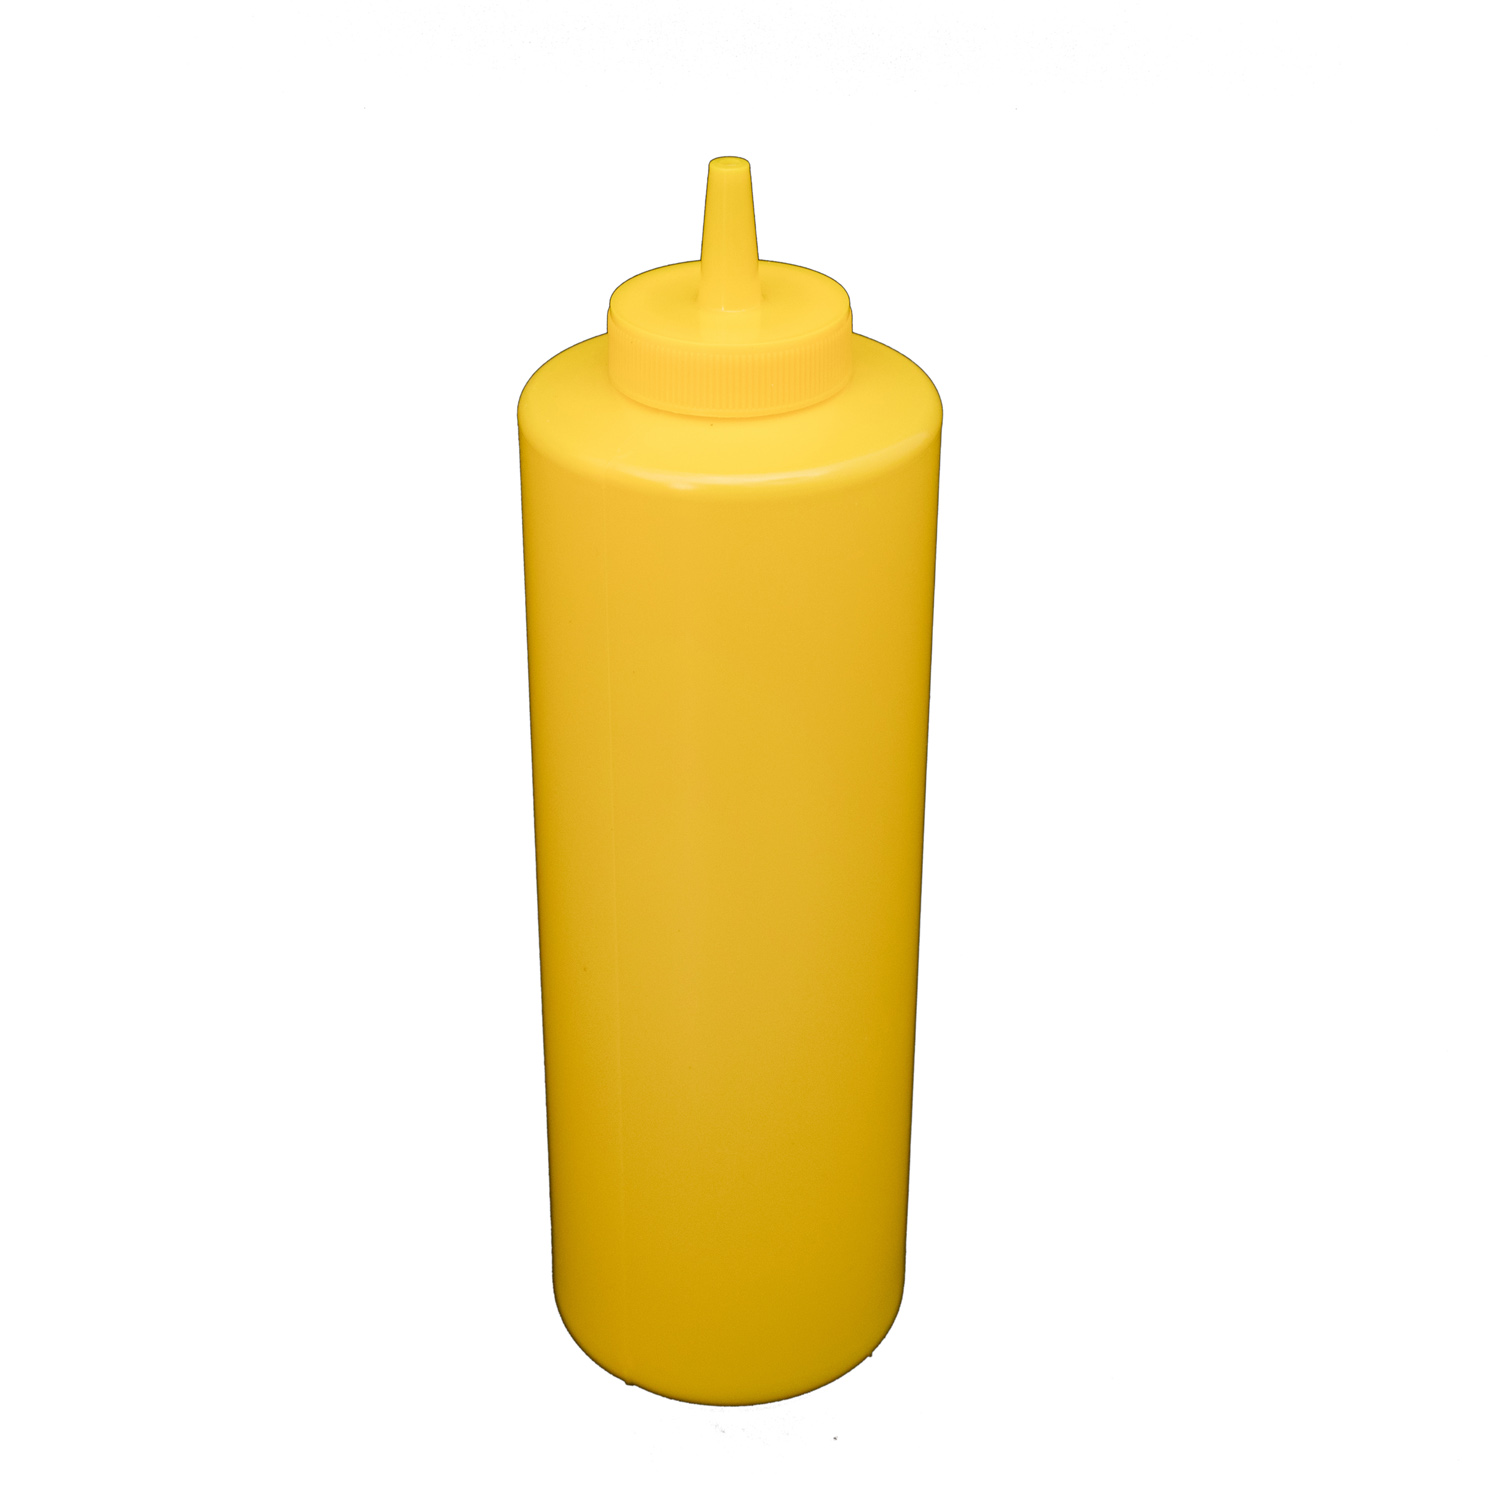 CAC China SQBT-24Y Yellow Plastic Squeeze Bottle 24 oz.